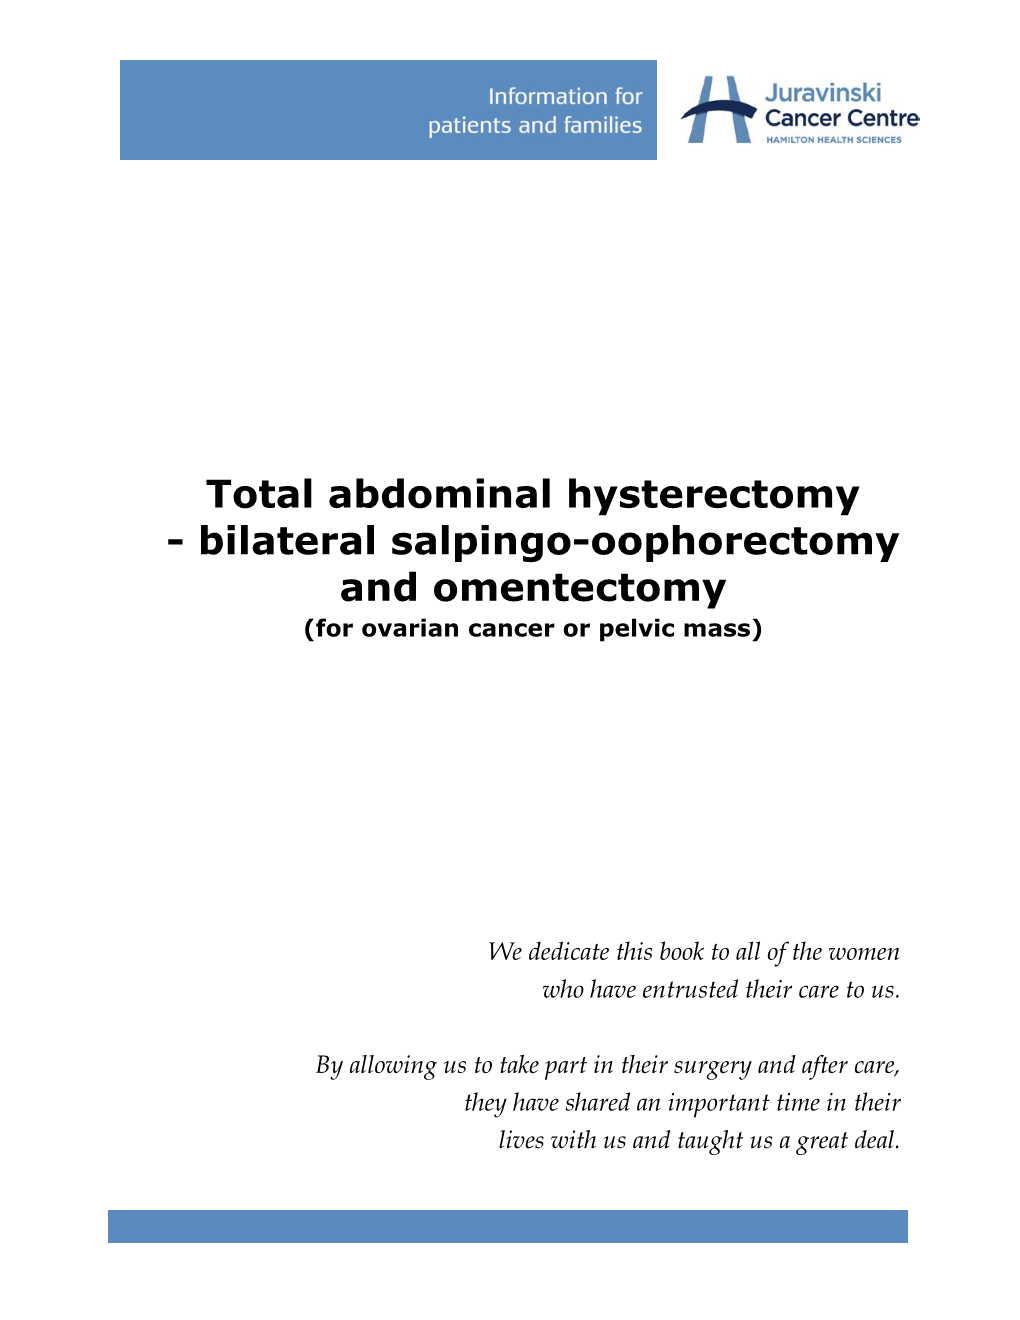 Total Abdominal Hysterectomy - Bilateral Salpingo-Oophorectomy and Omentectomy (For Ovarian Cancer Or Pelvic Mass)